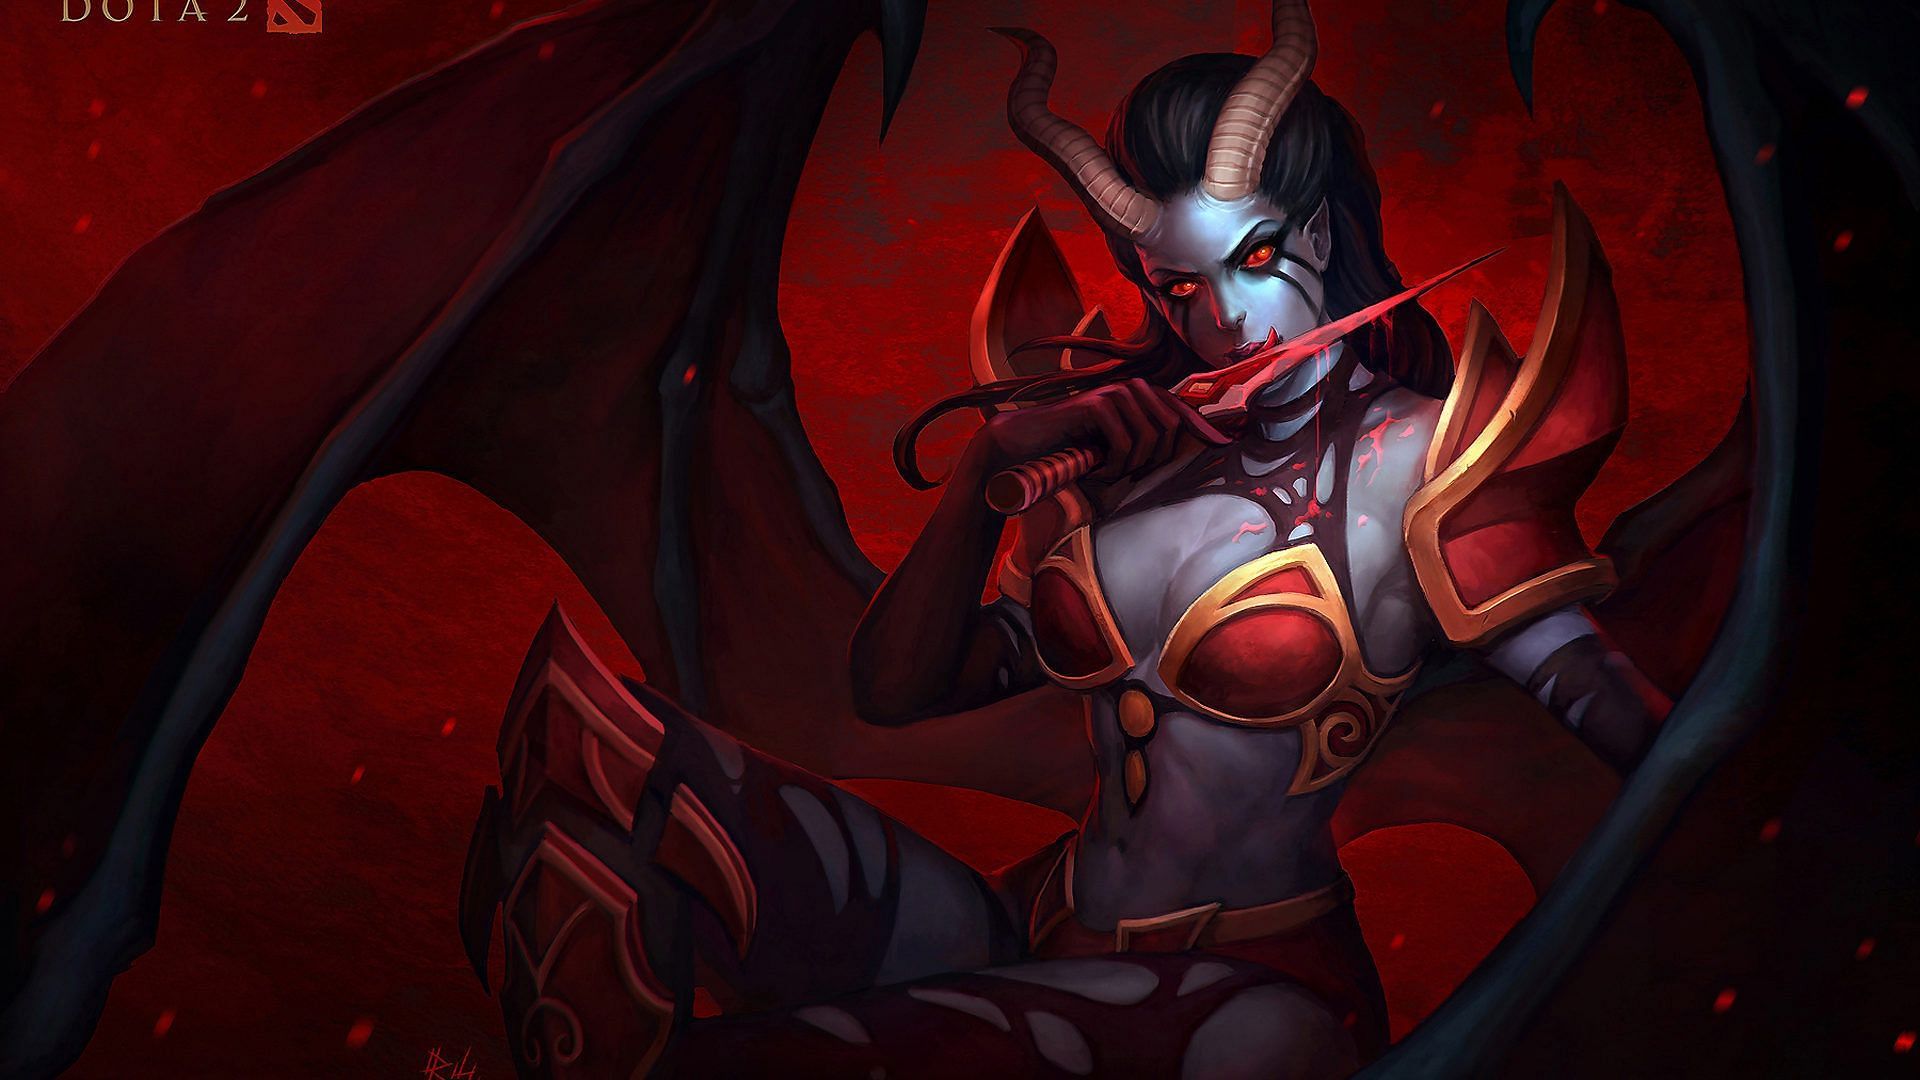 Queen of Pain unleashes her devastating powers, leaving her enemies in agony and despair (Image via DOTA 2)